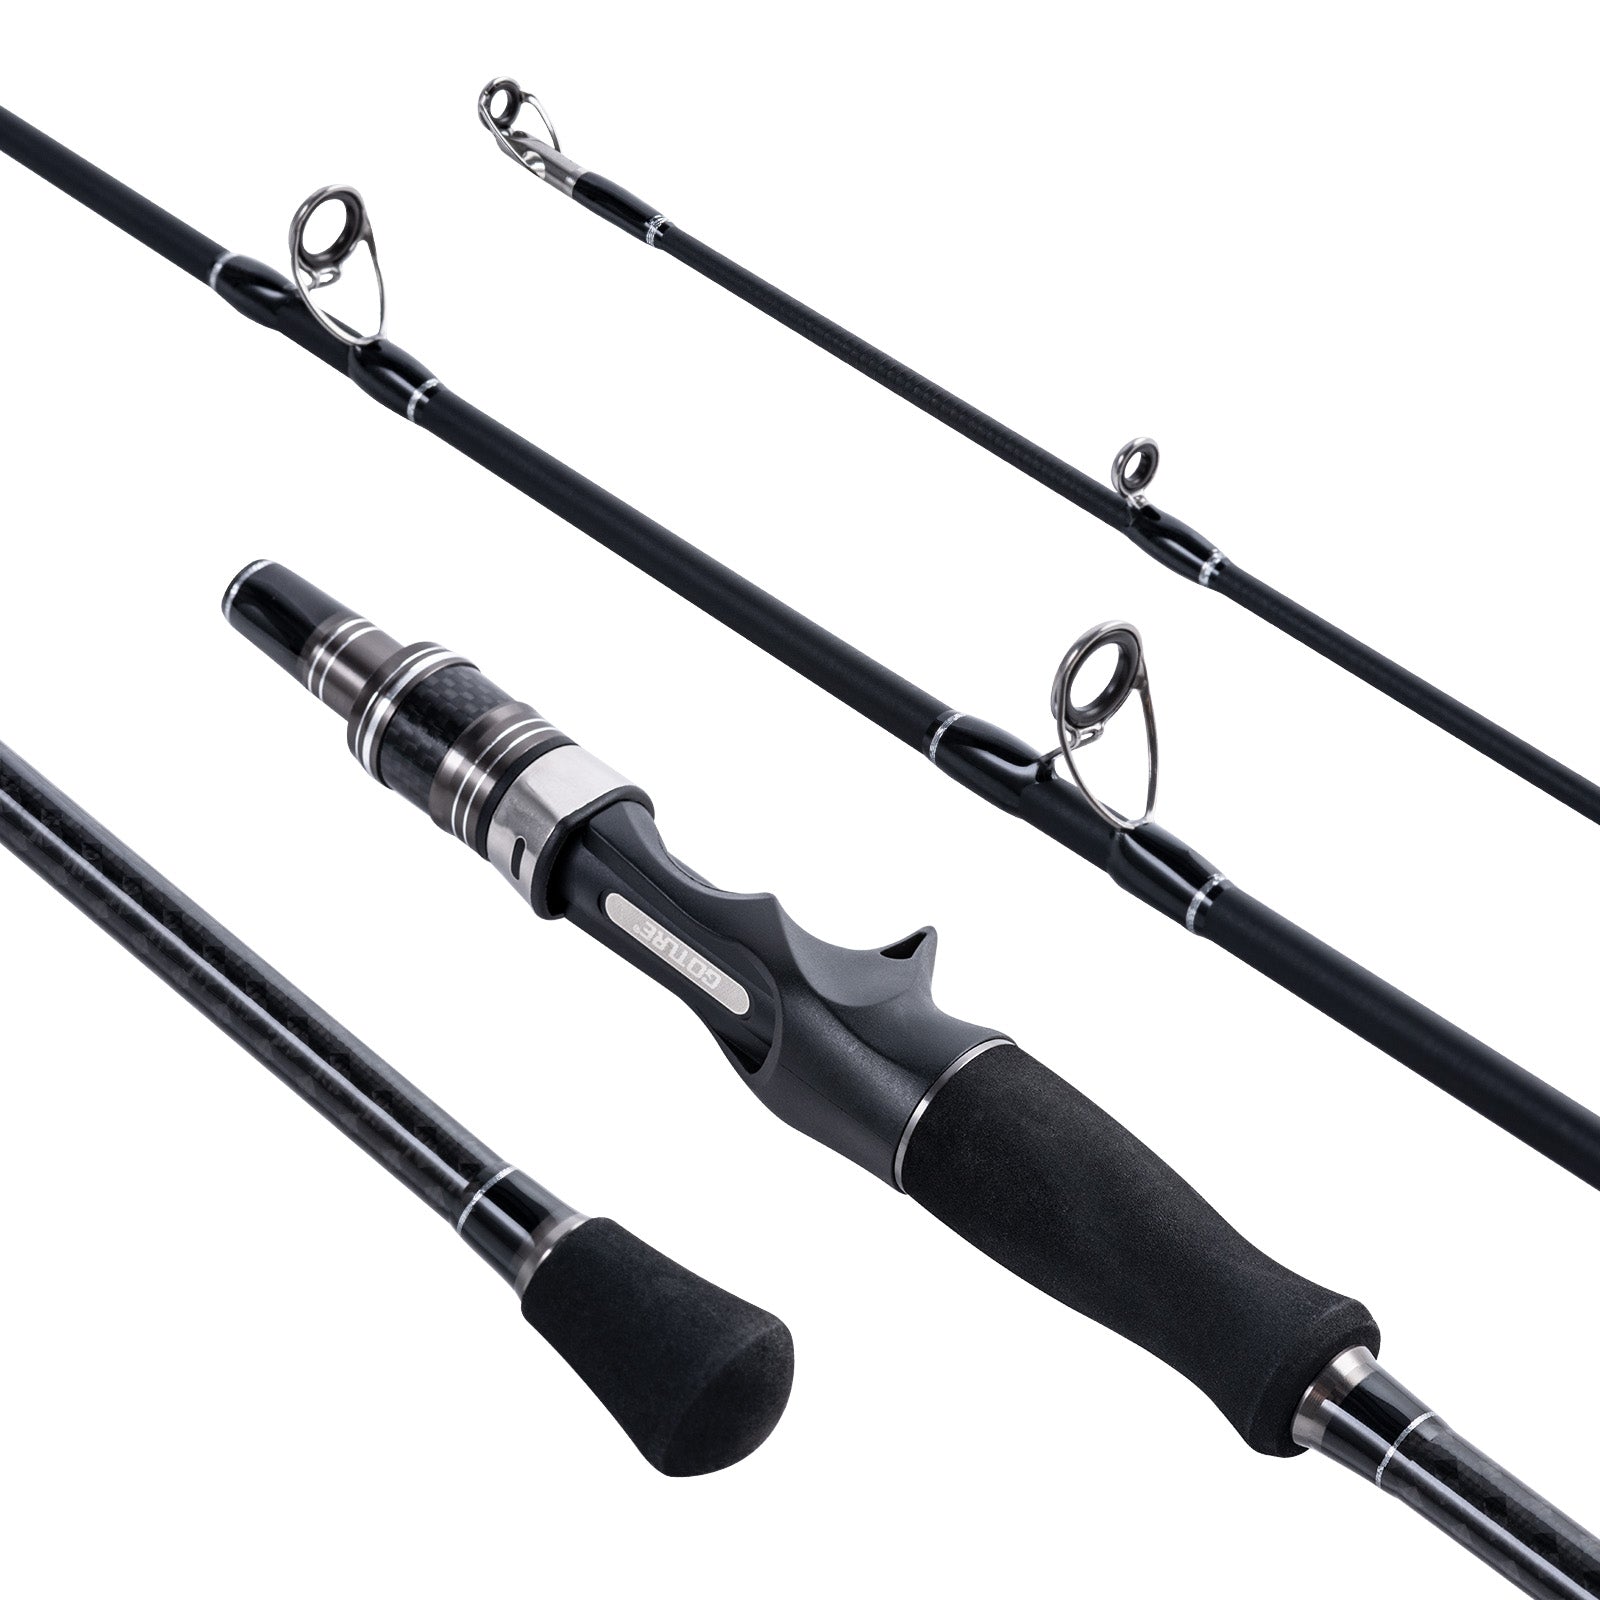 Goture Fly Fishing Rod Combo Review: Super Light, Portable, and Versatile!  